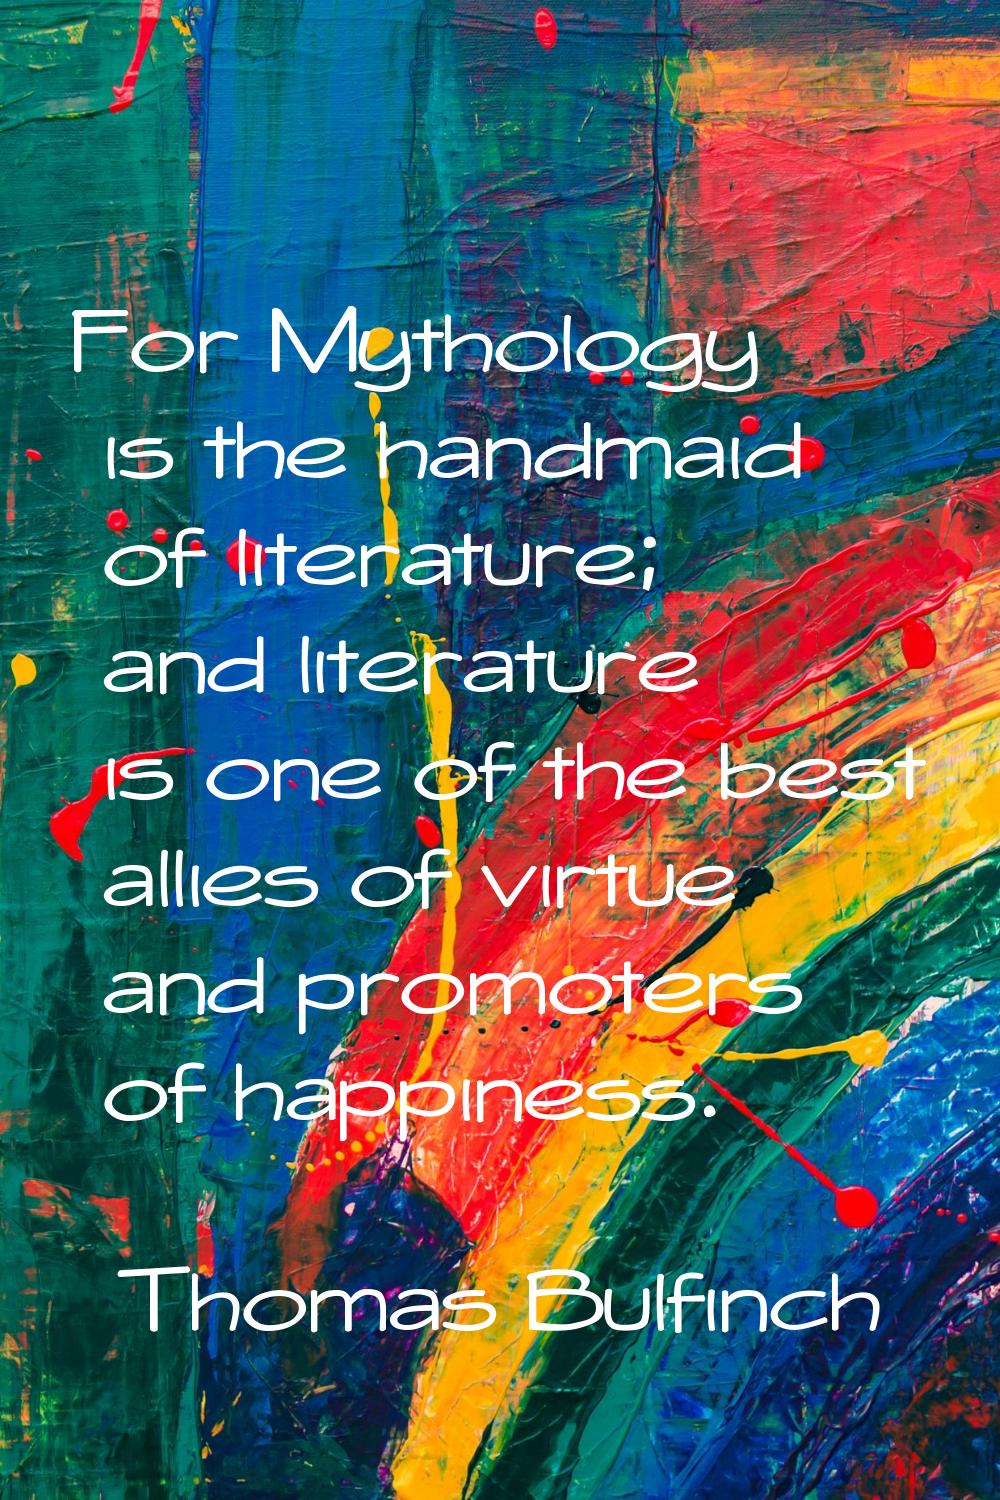 For Mythology is the handmaid of literature; and literature is one of the best allies of virtue and